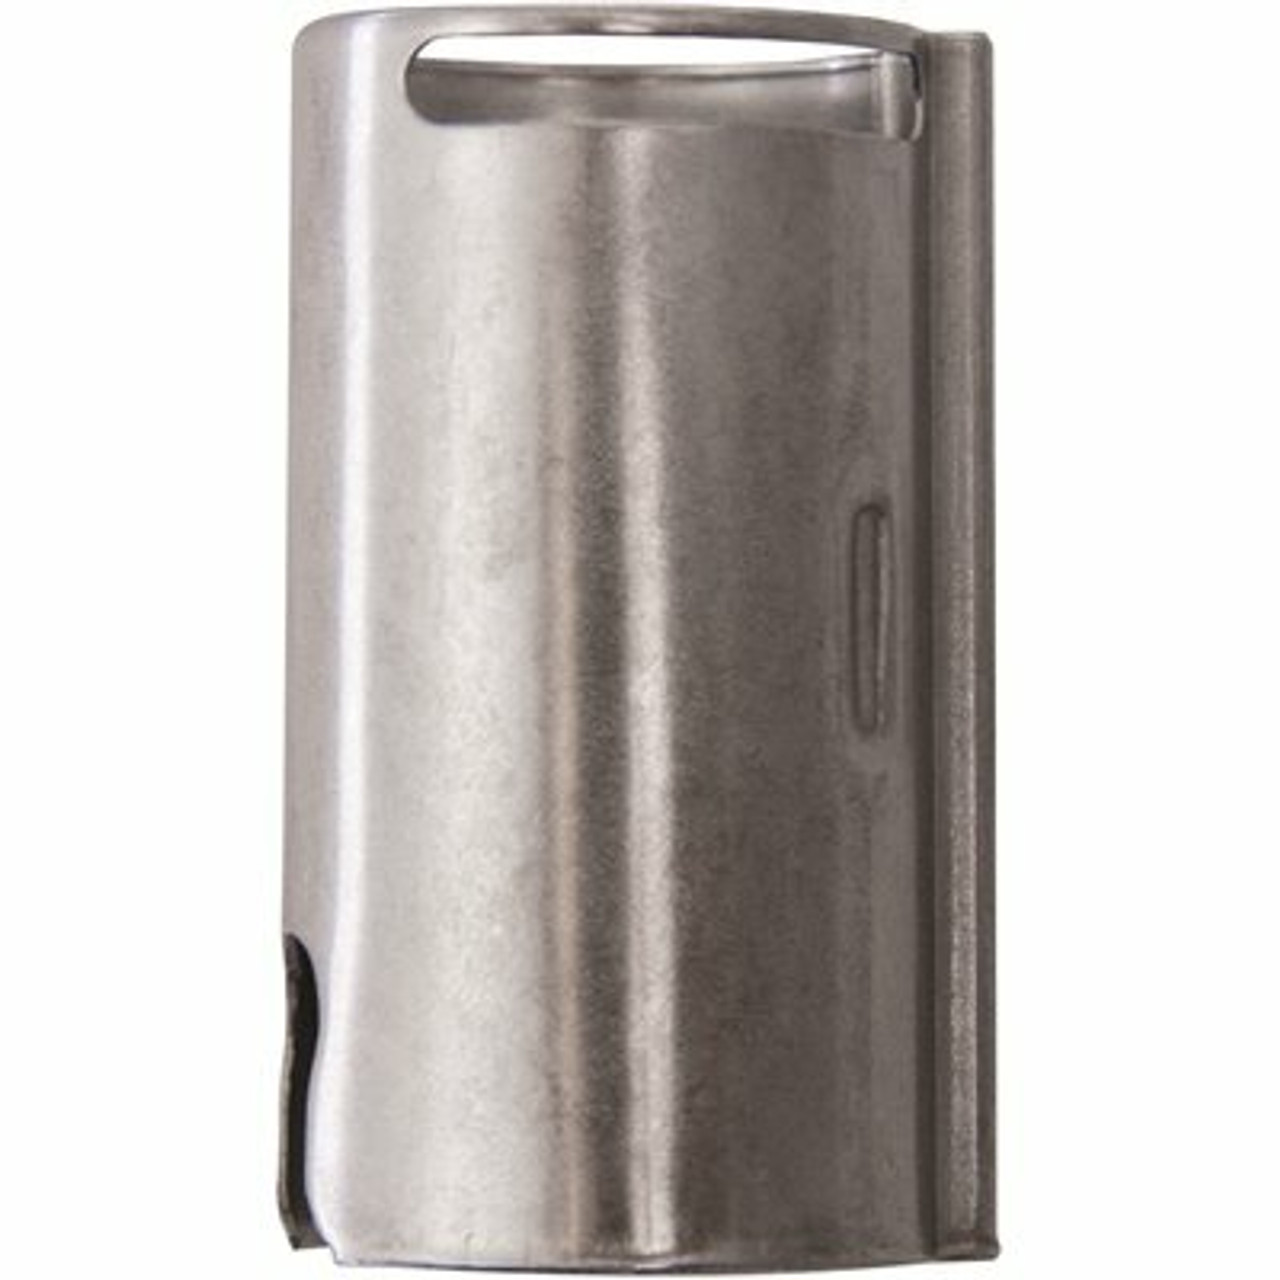 Moen Stop Tube, Legend And Chateau 1-Handle Tub/Shower Knob Handle In Chrome